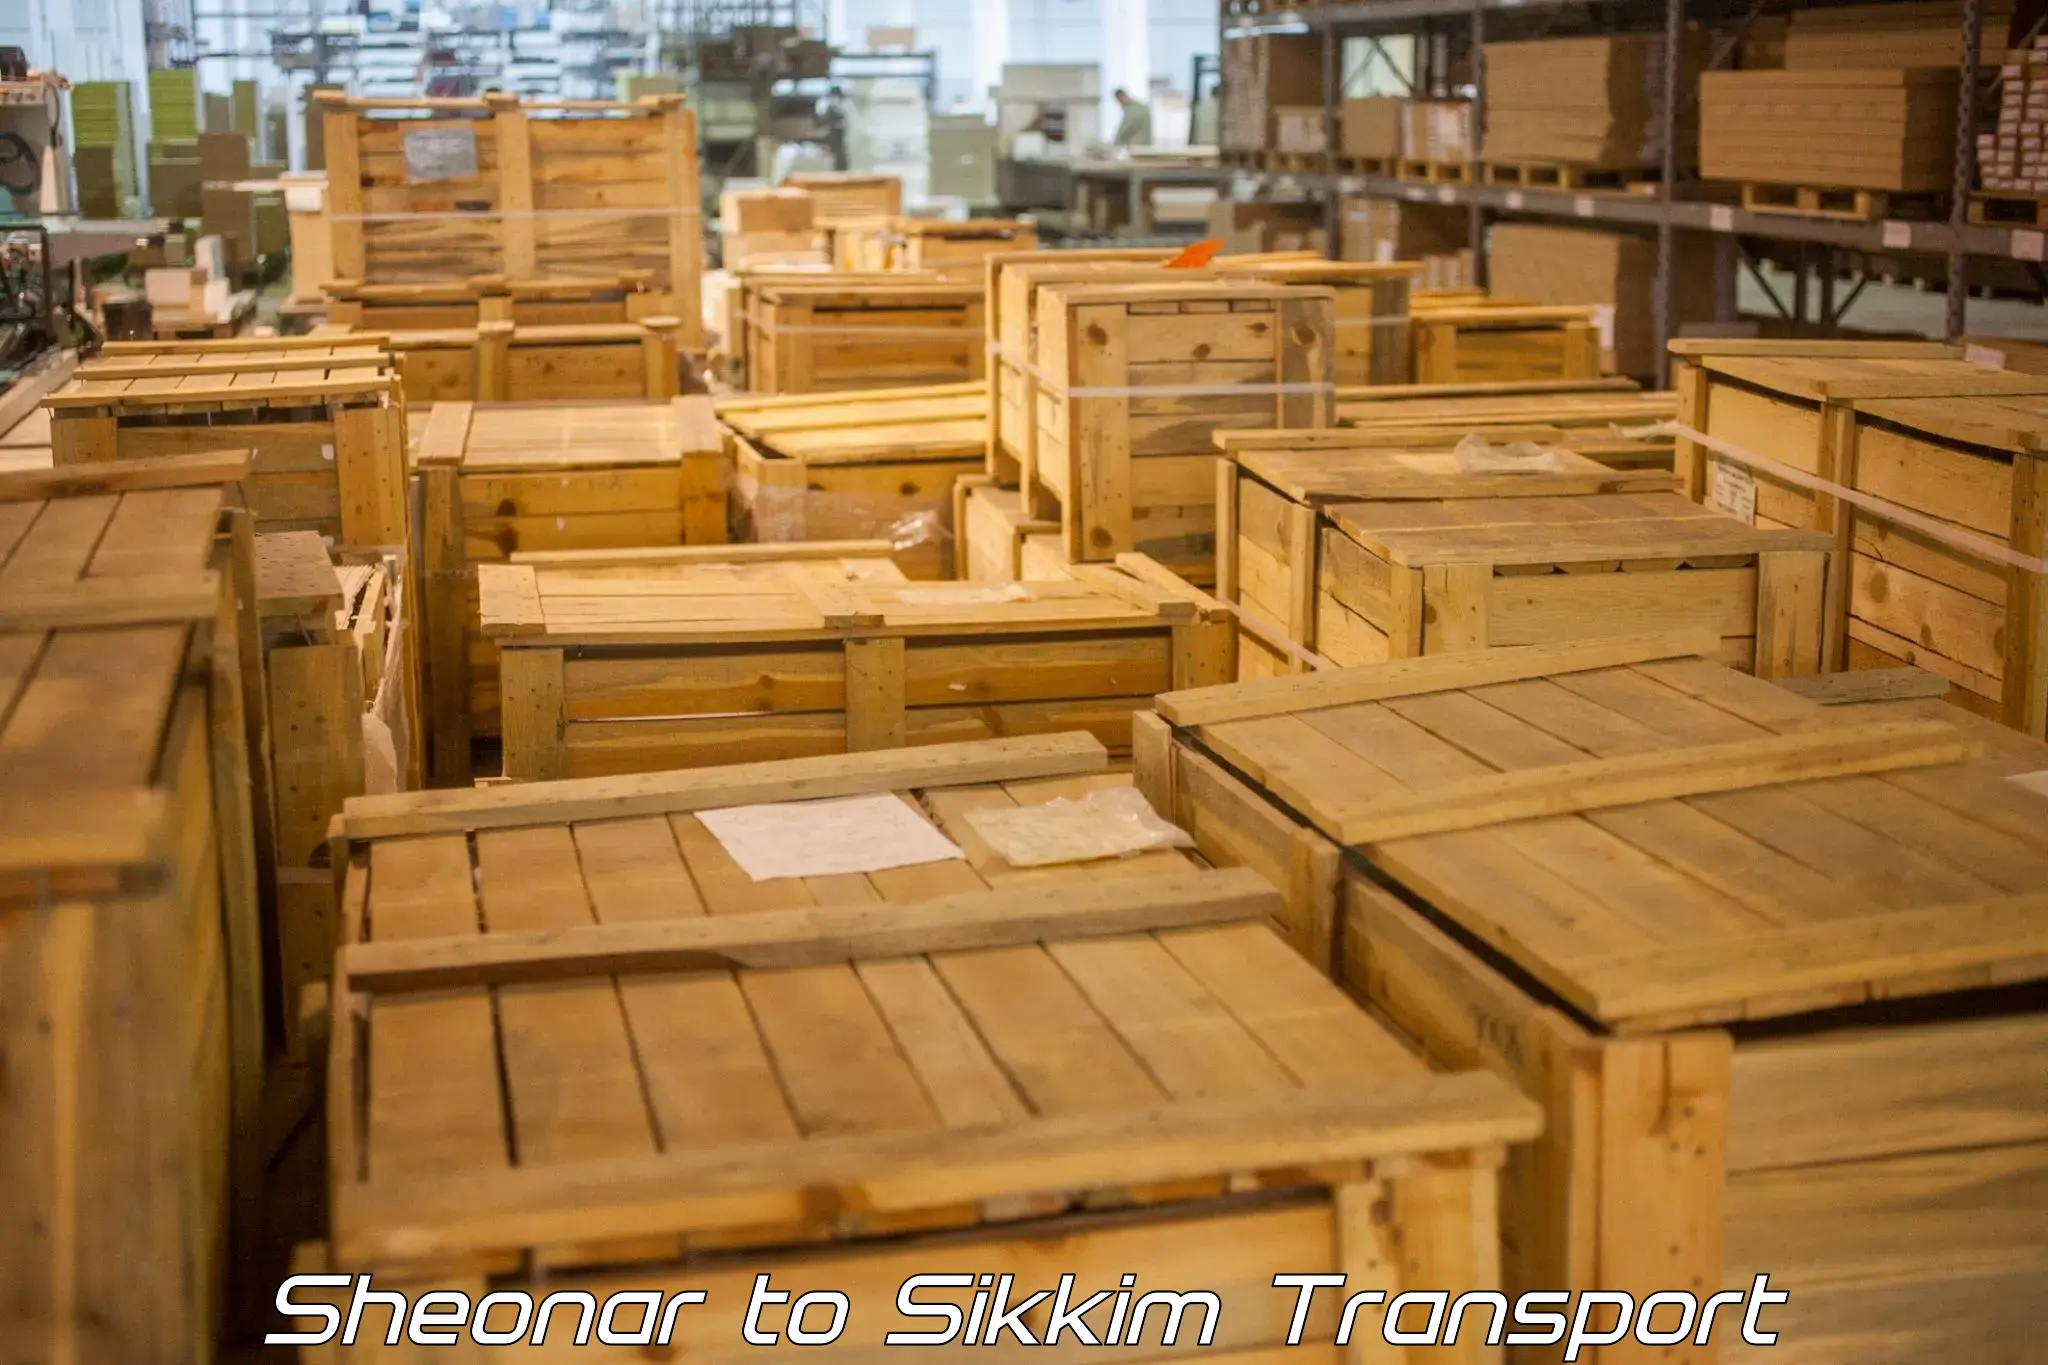 Express transport services Sheonar to East Sikkim